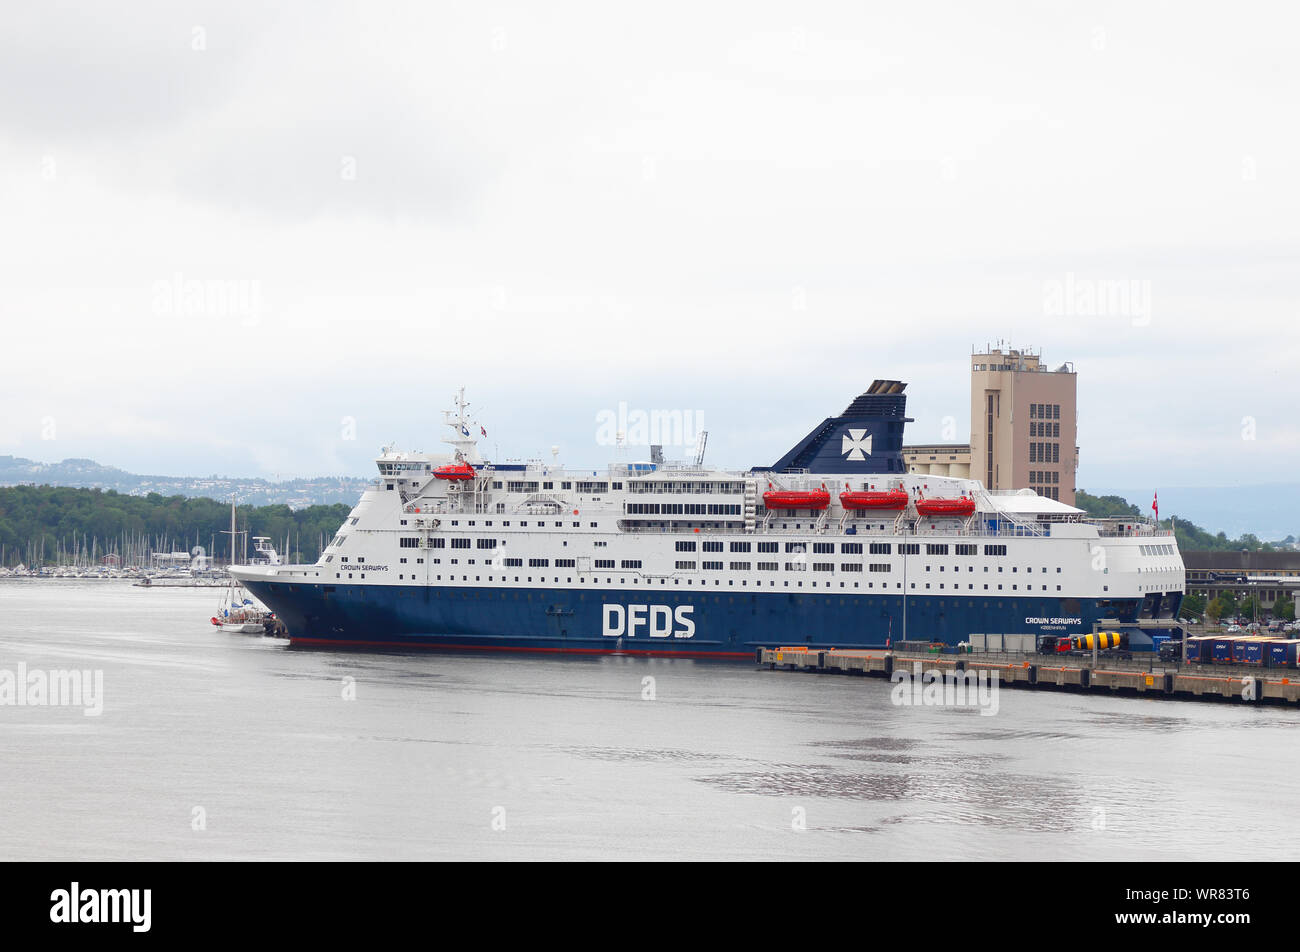 Oslo, Norway - June 20, 2019: The ROPAX ferry Crown Seaways operates the  DFDS route to Copenhagen Stock Photo - Alamy